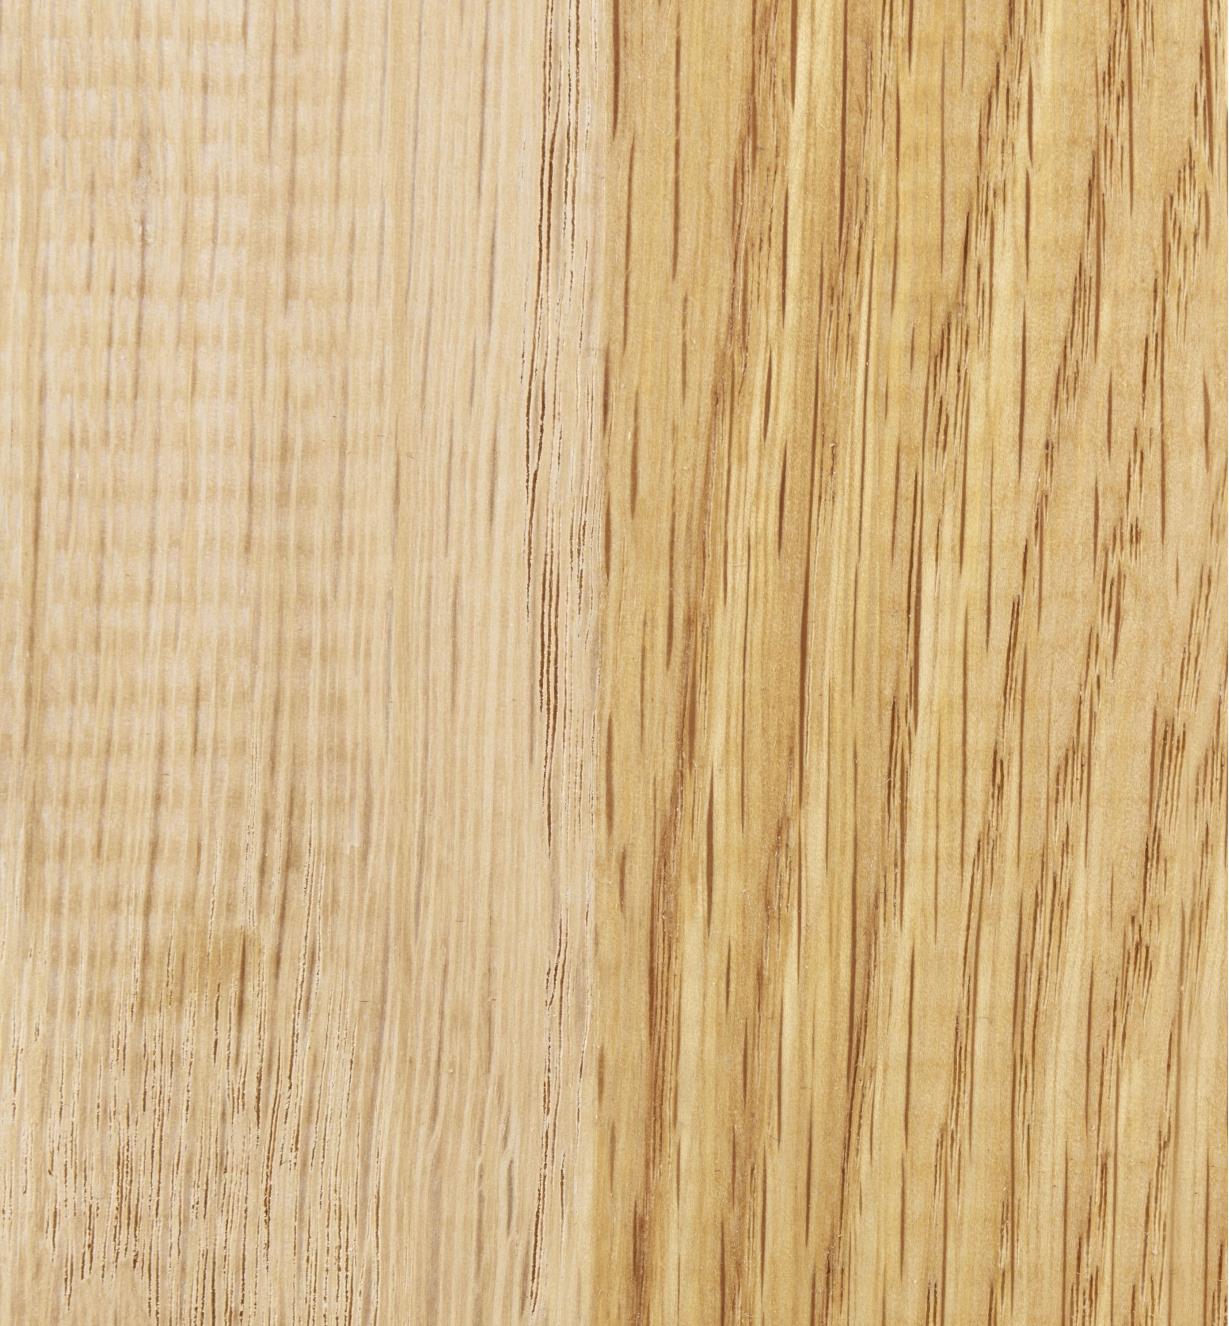 On the left is untreated wood, and on the right is wood treated with Odie’s Wax